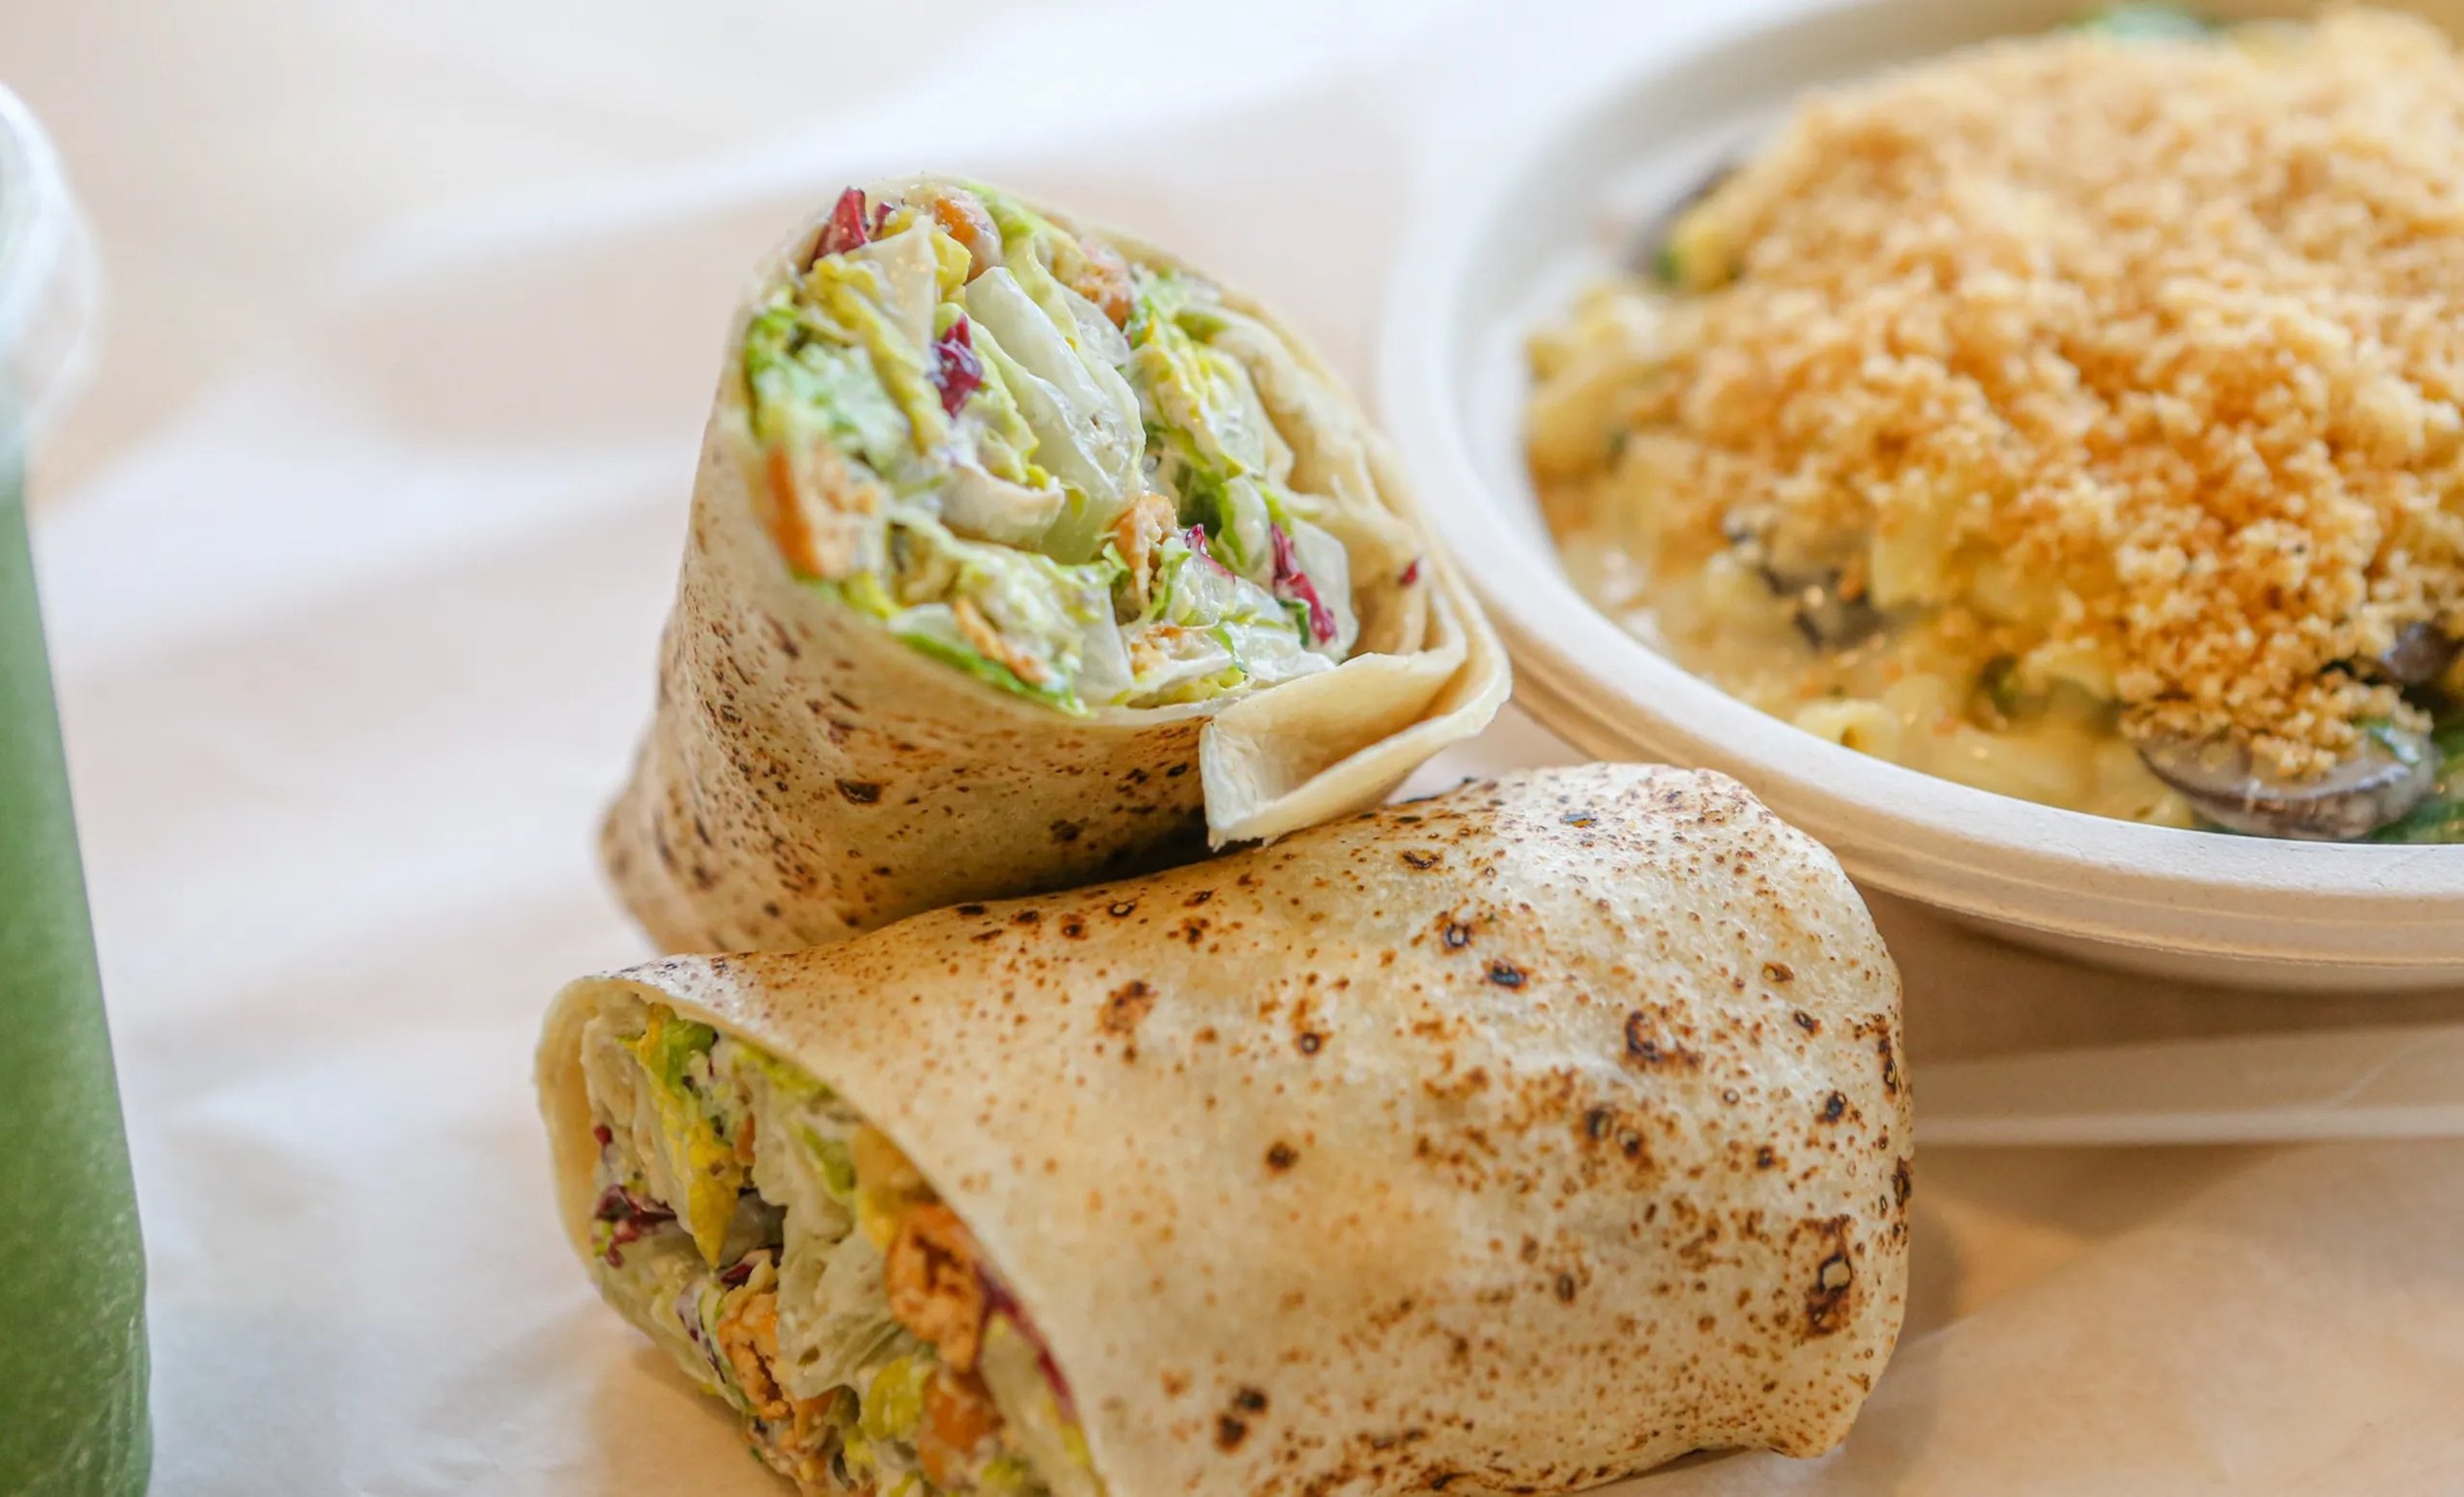  A Chickpea Caesar Wrap and Mac &amp; Cheese are also on the menu, offering tastes beyond burgers and chik patties. Photo credit David DelPoio, The Providence Journal 